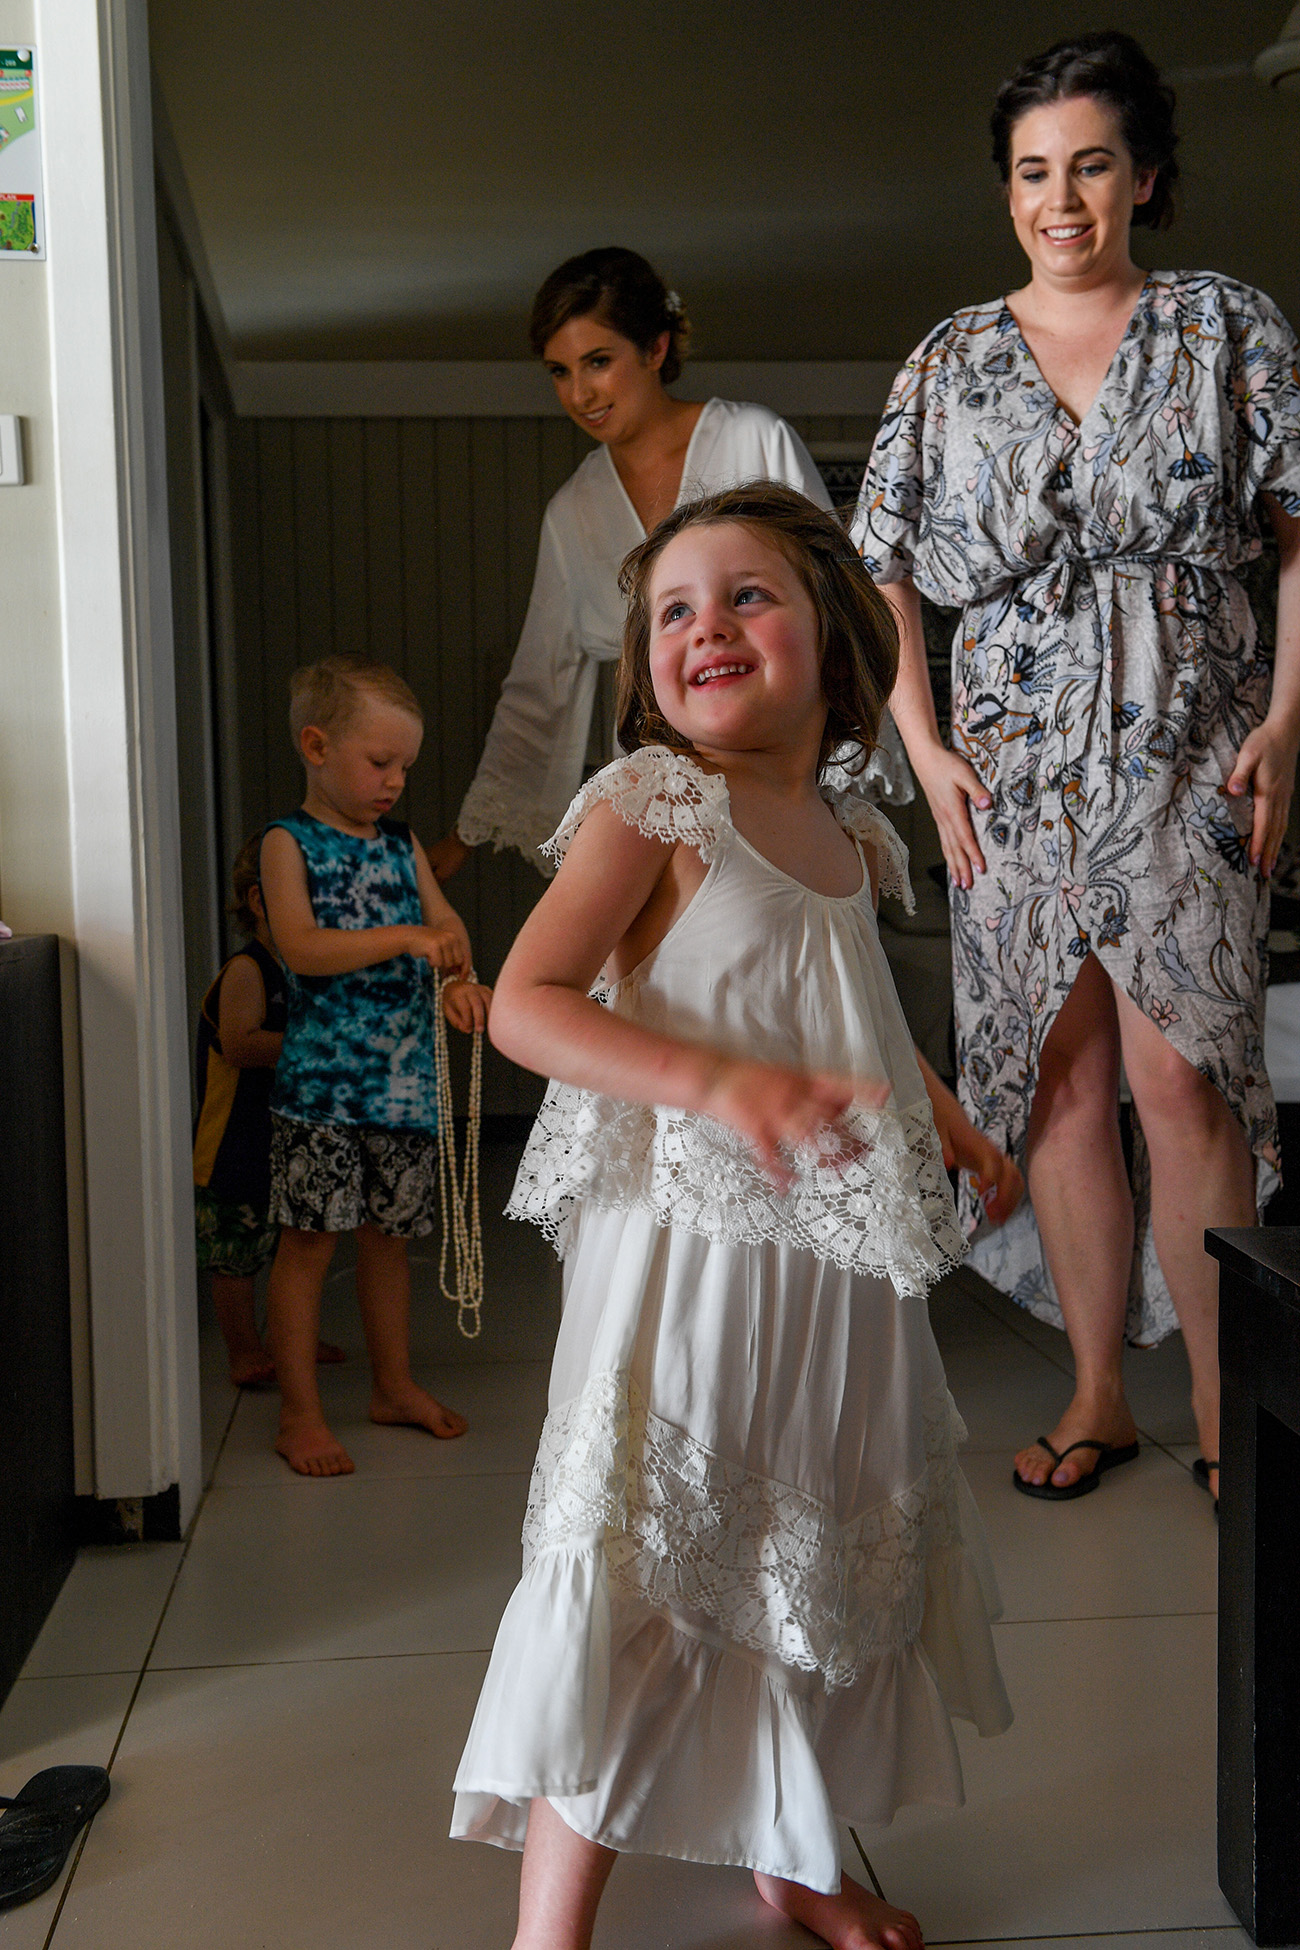 Flowergirl dances in her white lace dress